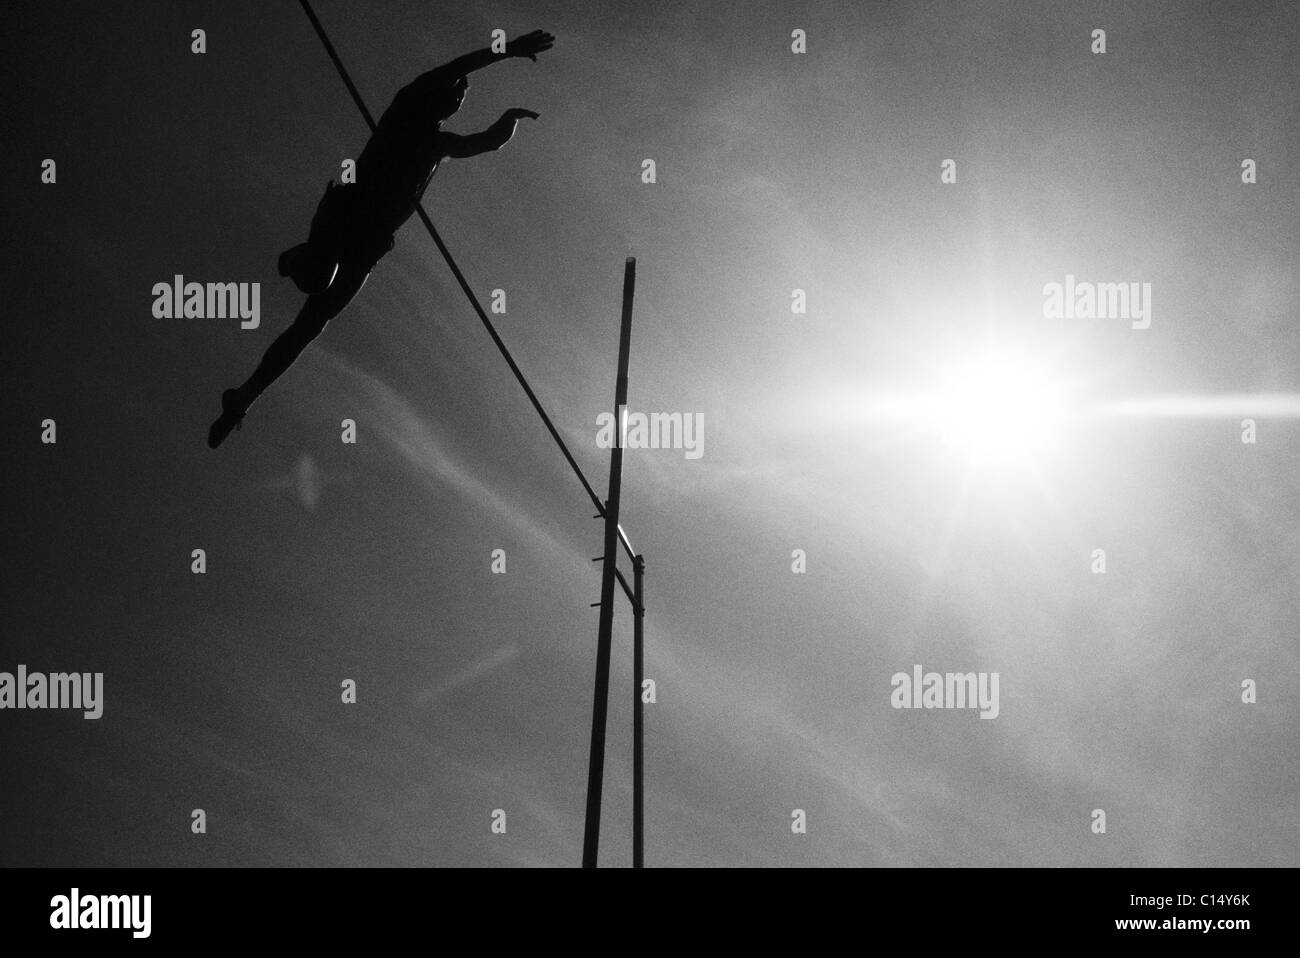 Silhouette of a pole vaulter in action. Stock Photo